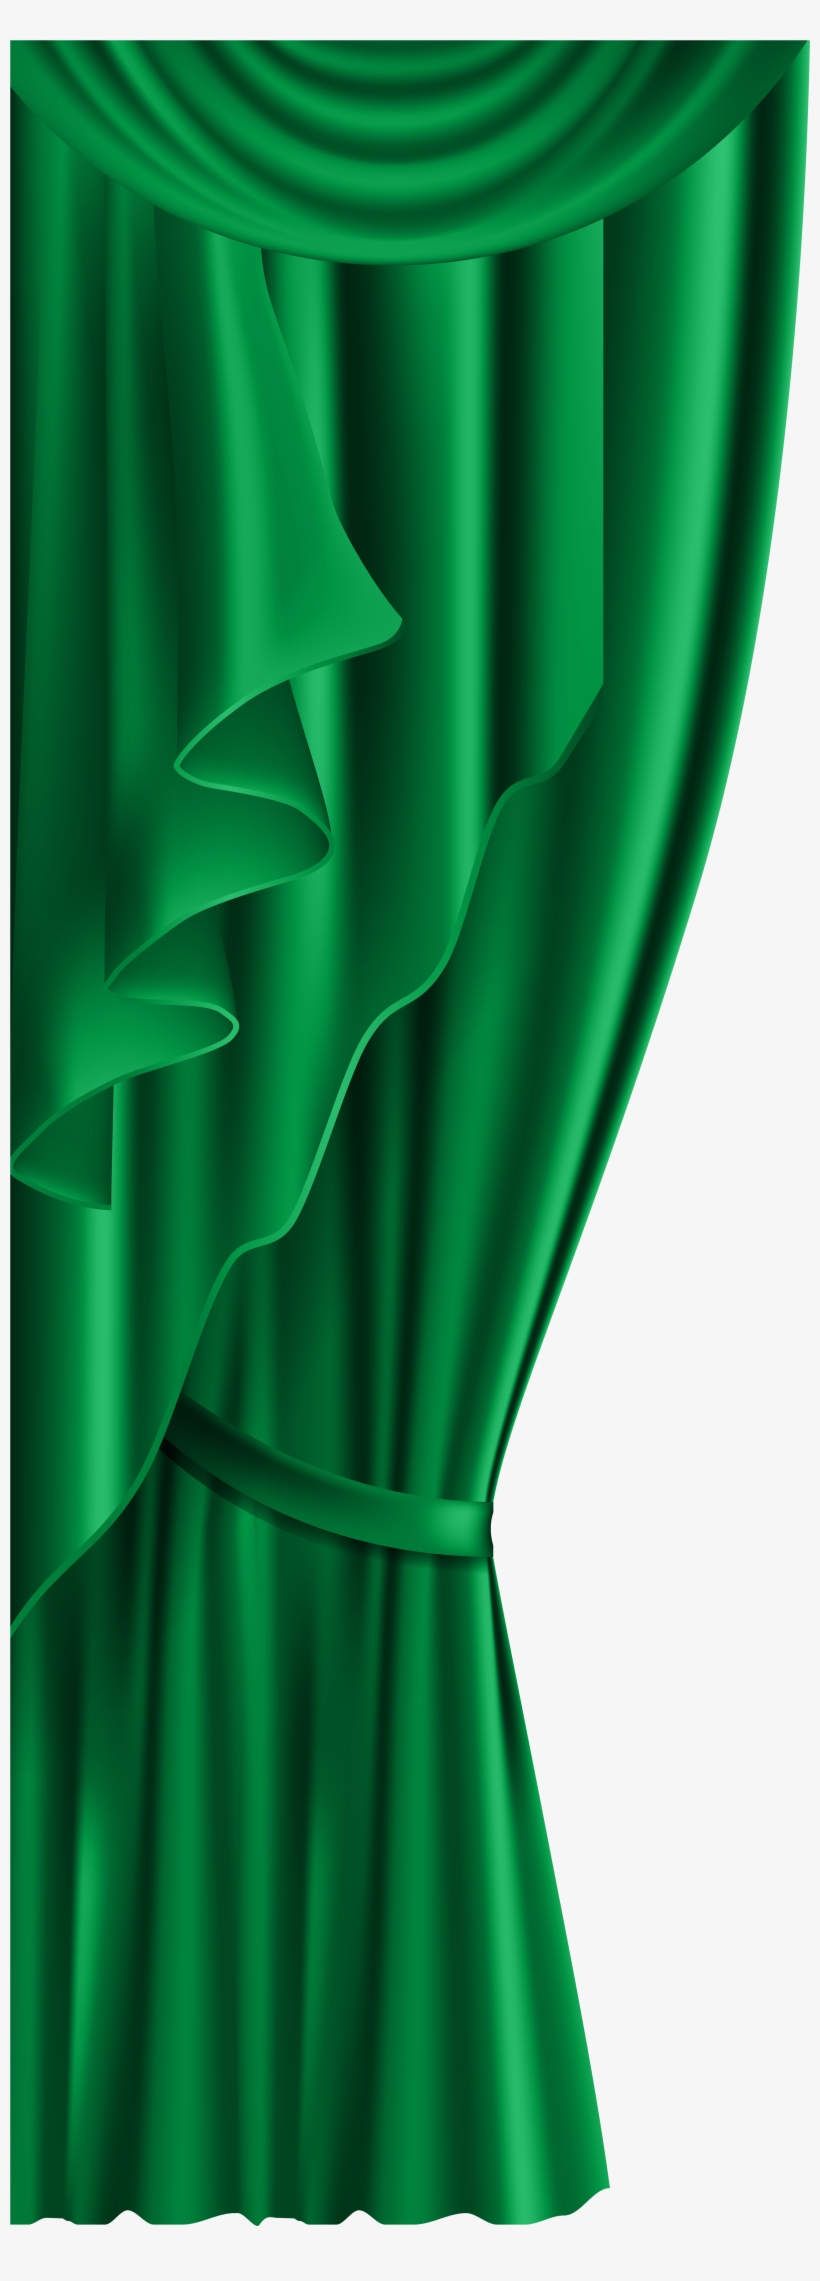 Png Freeuse Drawing Curtains Green - Curtain Green Png - Free Transparent  PNG Download - PNGkey